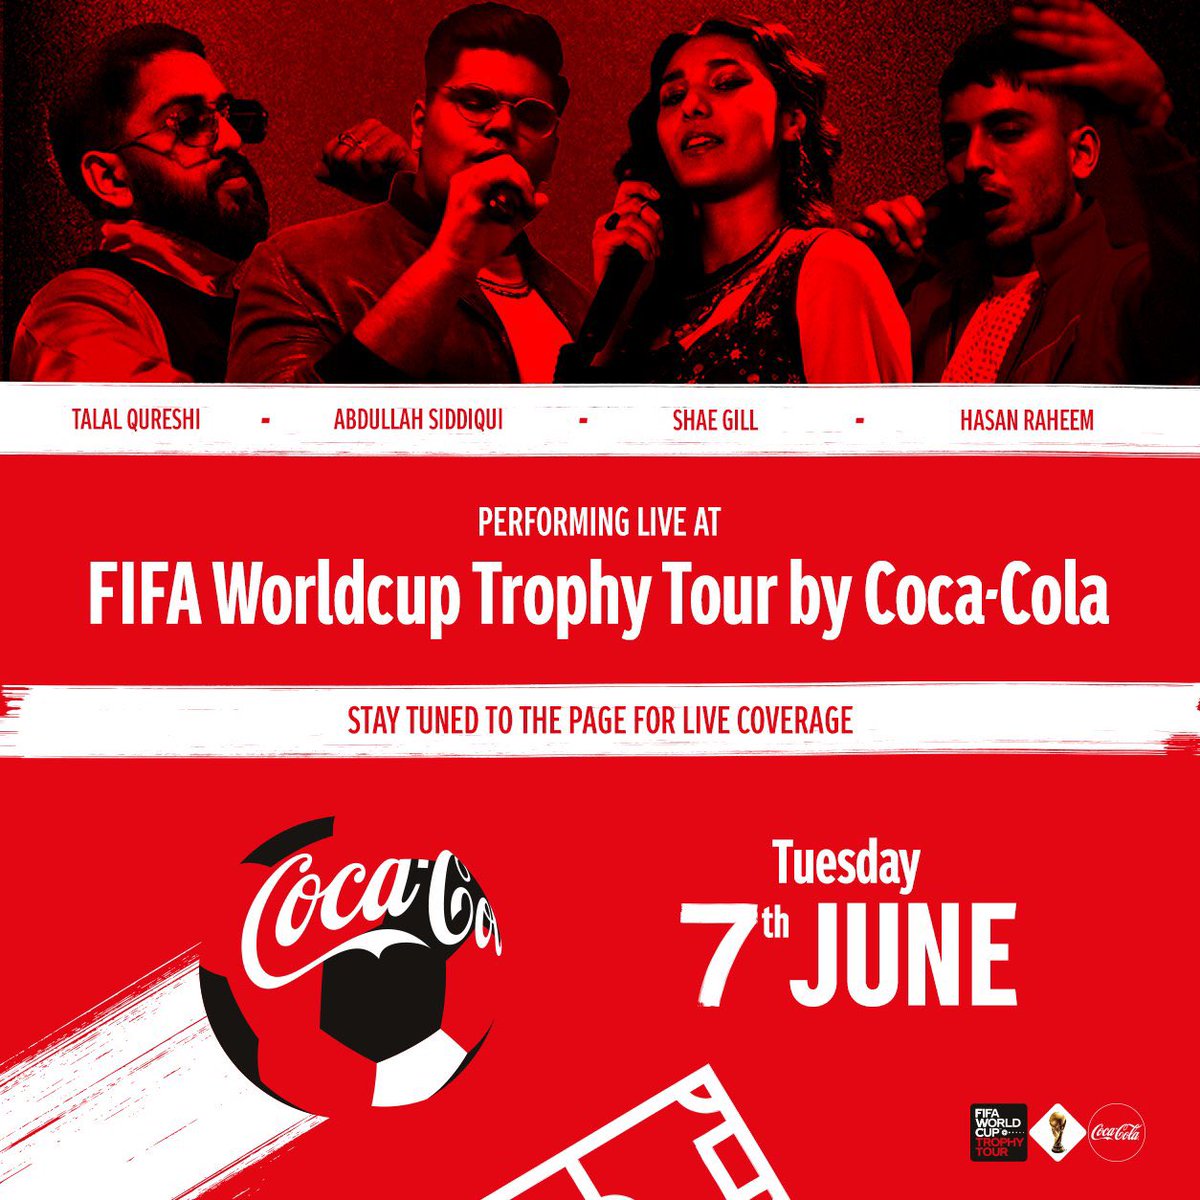 Bring out your football passion, as the FIFA Trophy makes its way to Pakistan! Stay tuned to Coca-Cola handles and witness the Trophy followed up by the concert, LIVE! #BelievingIsMagic